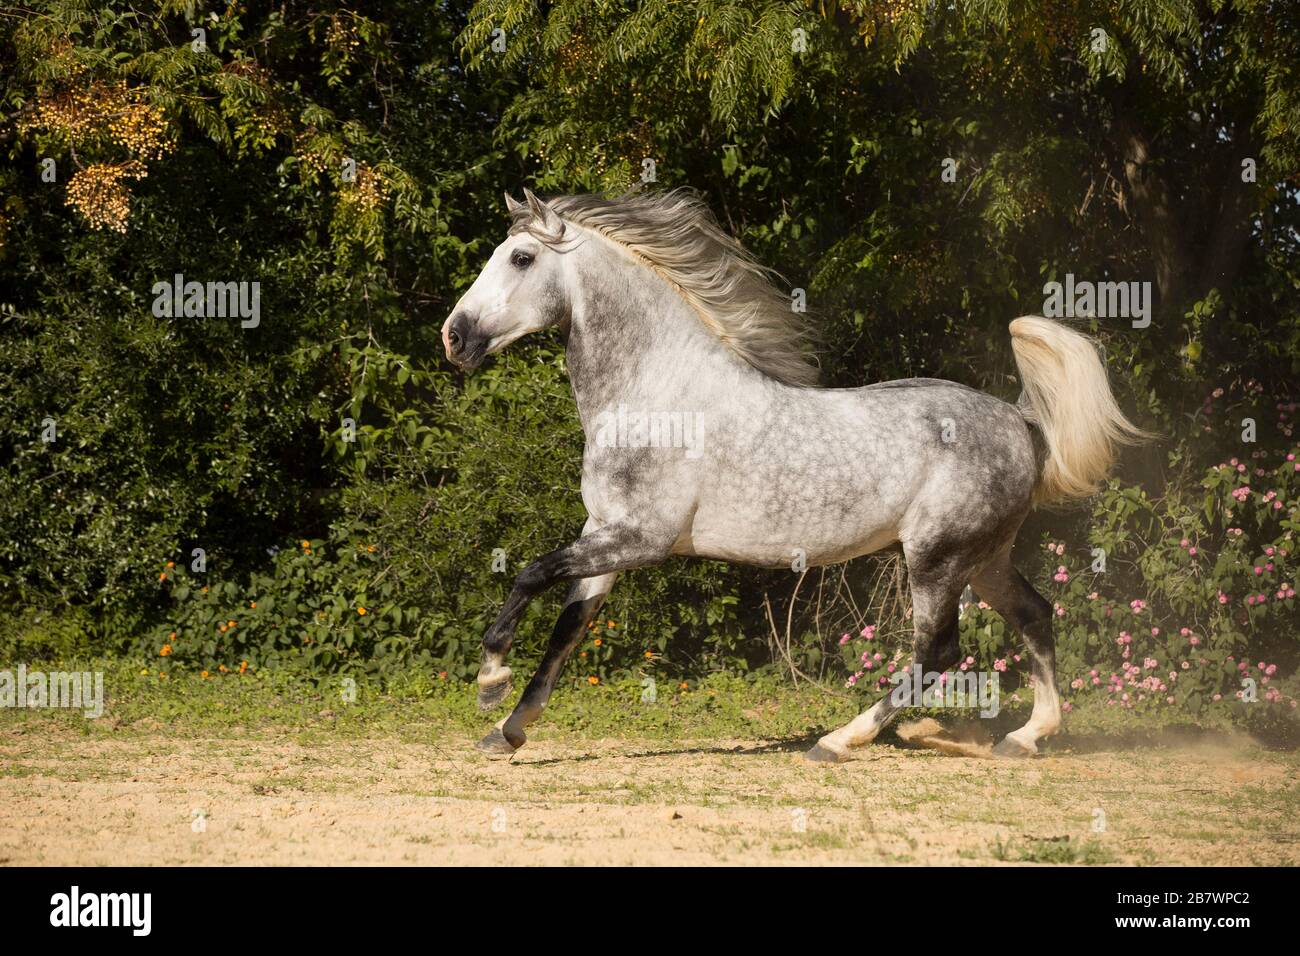 P.R.E. Stallion at Gallop, Andalusia, Spain Stock Photo